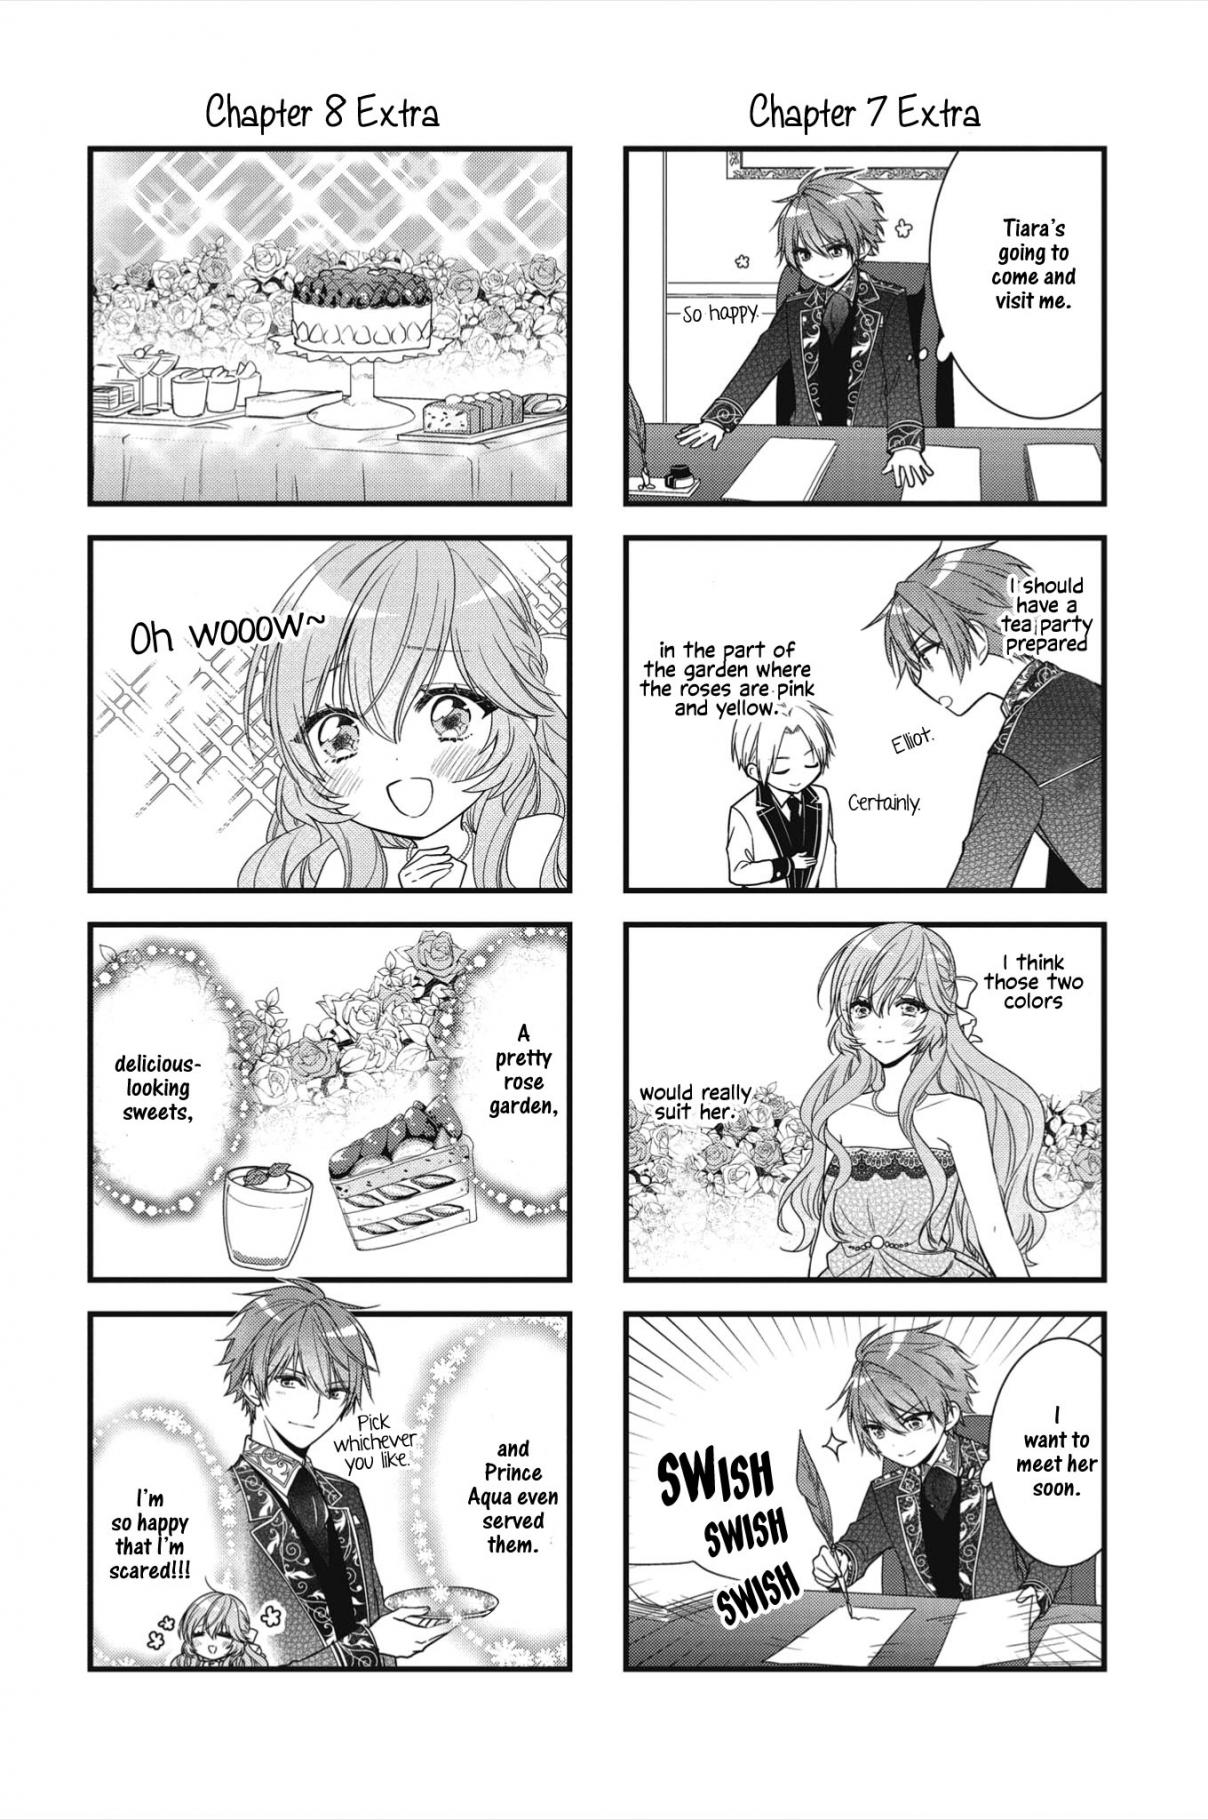 The Villainess Is Adored by the Crown Prince of the Neighboring Kingdom Vol. 2 Ch. 8.5